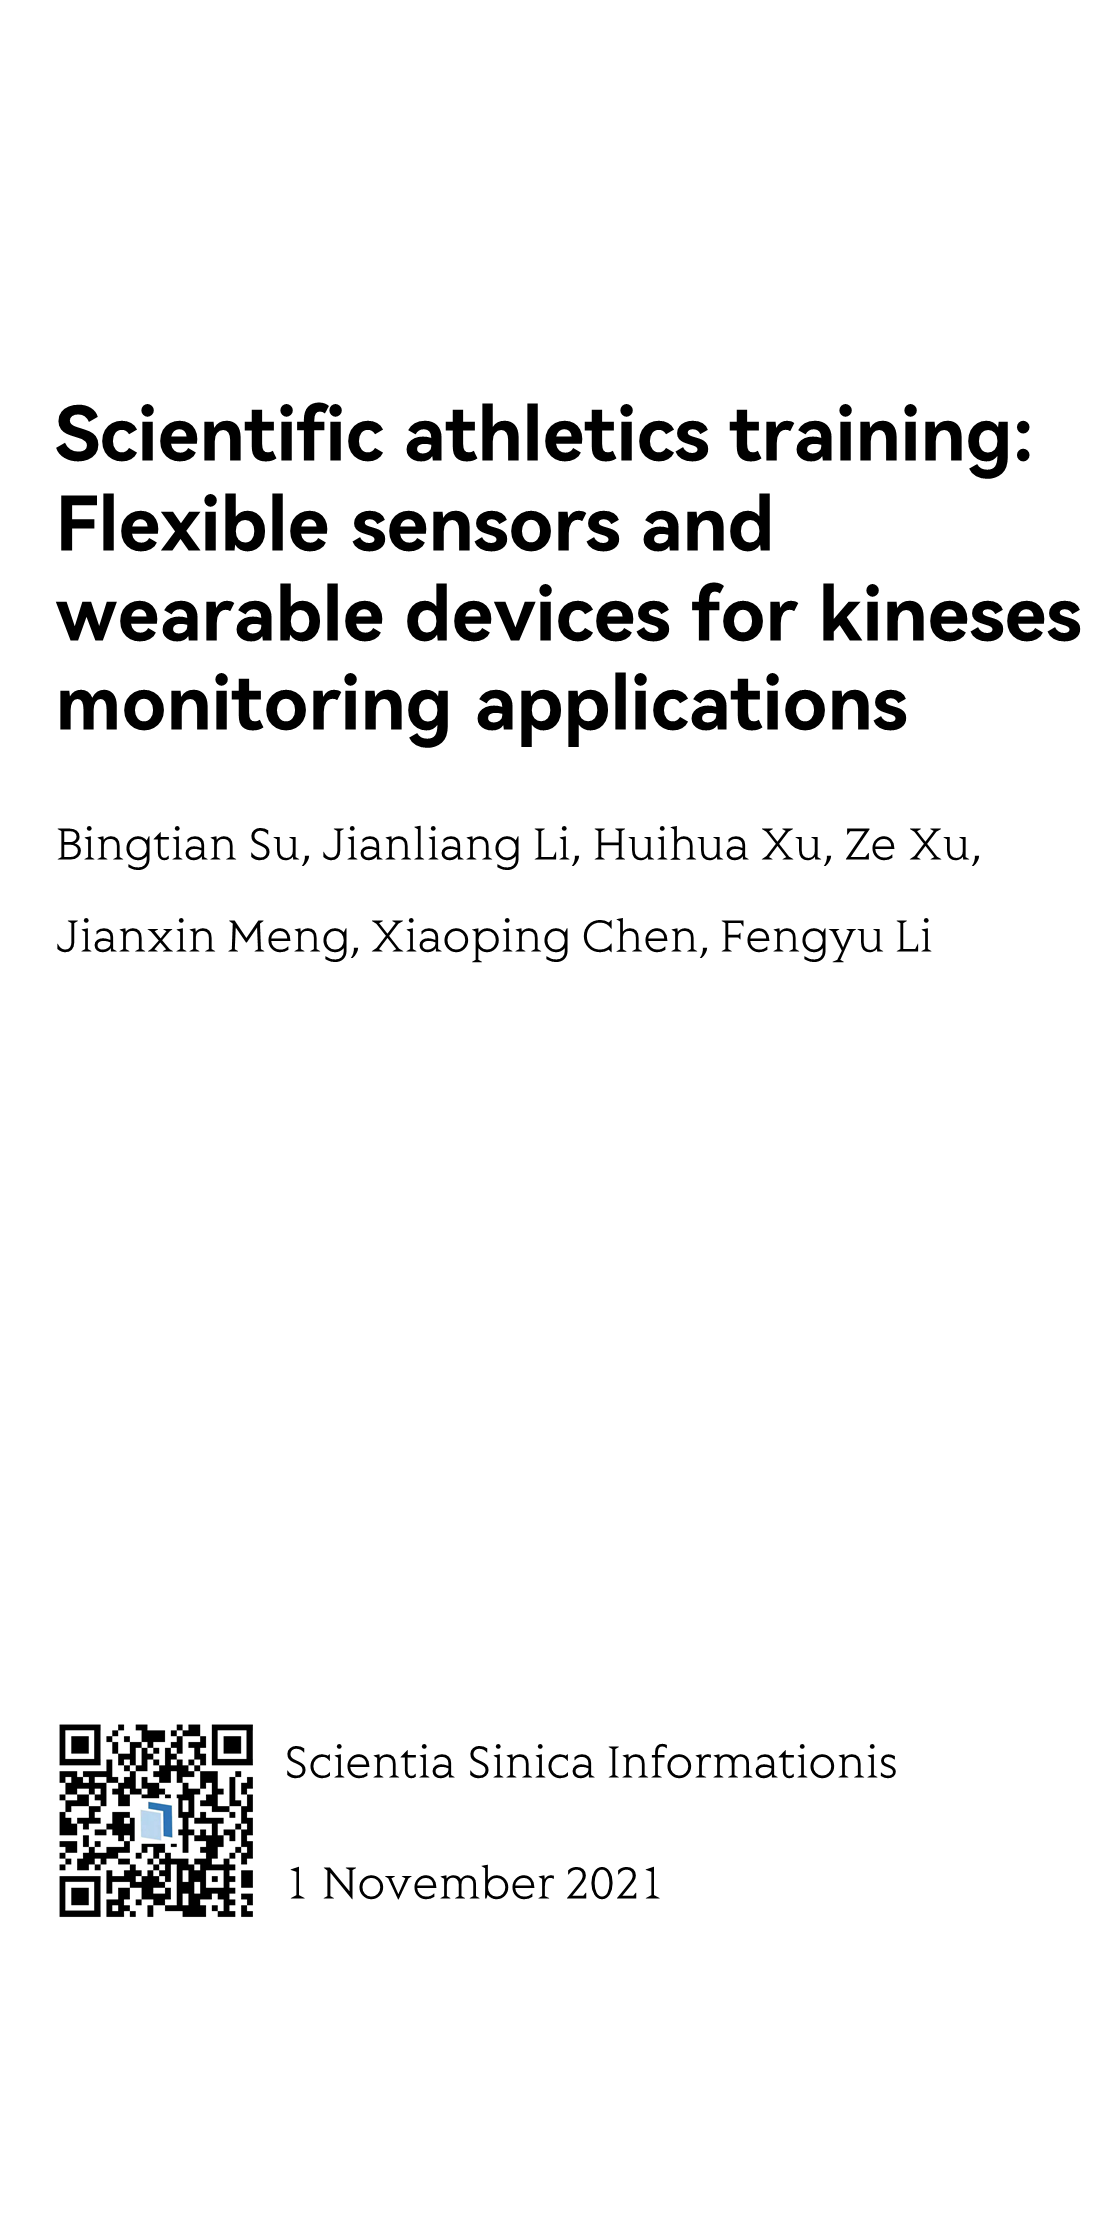 Scientific athletics training: Flexible sensors and wearable devices for kineses monitoring applications_1